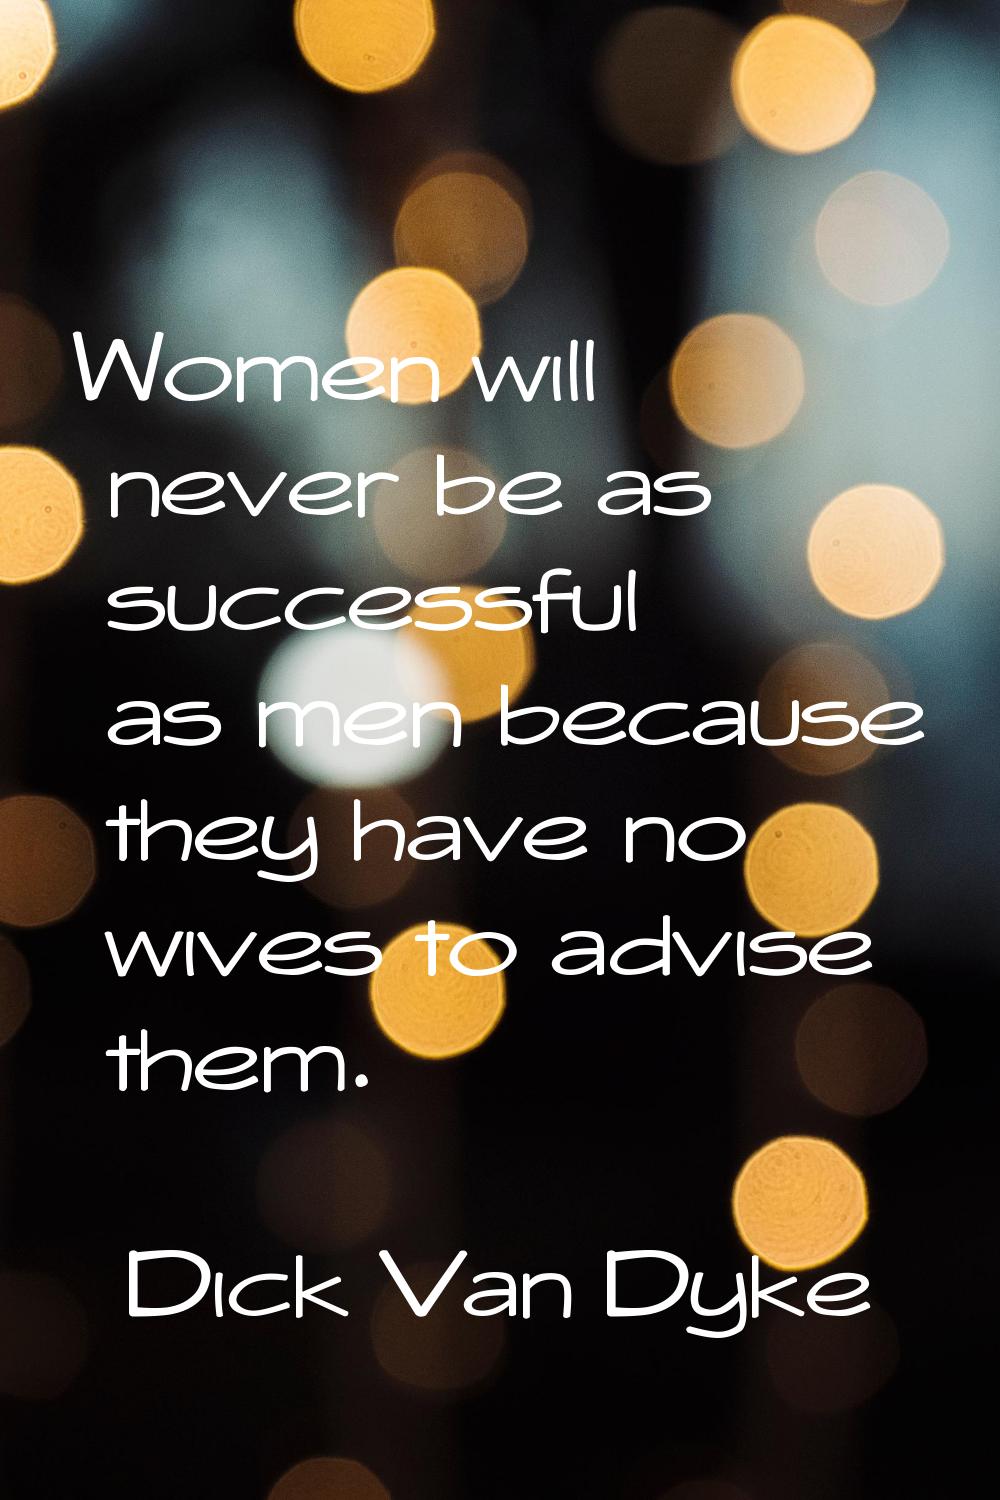 Women will never be as successful as men because they have no wives to advise them.